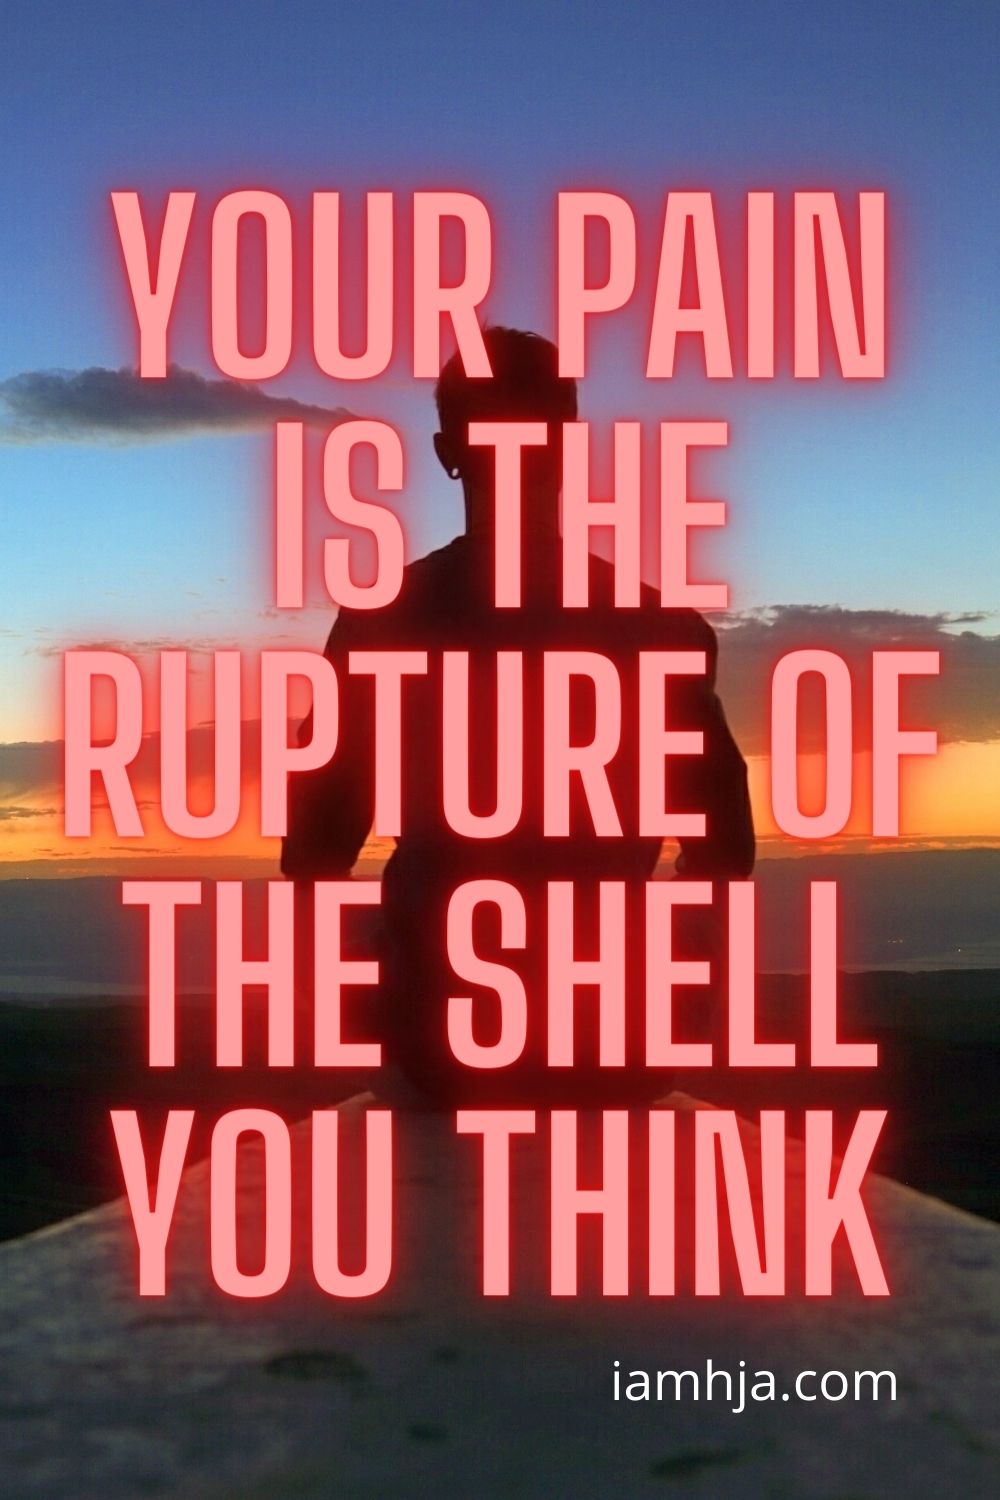 Spiritual Quotes: Your pain is the rupture of the shell you think